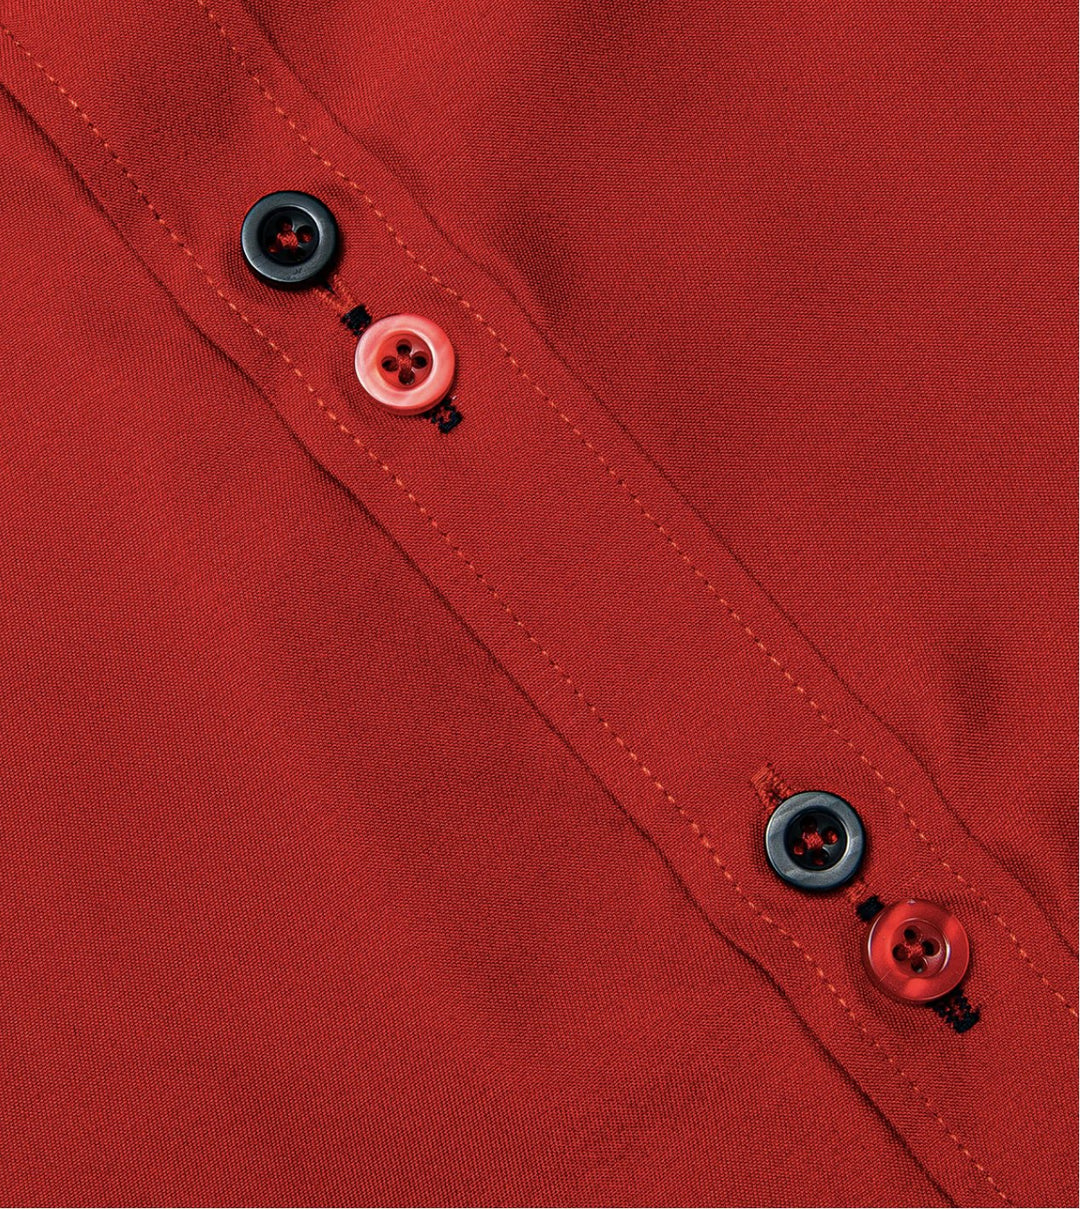 Red Mens's Shirt with contrast colored buttons unique cuffs design - CY - 2201 - SimonVon Shop